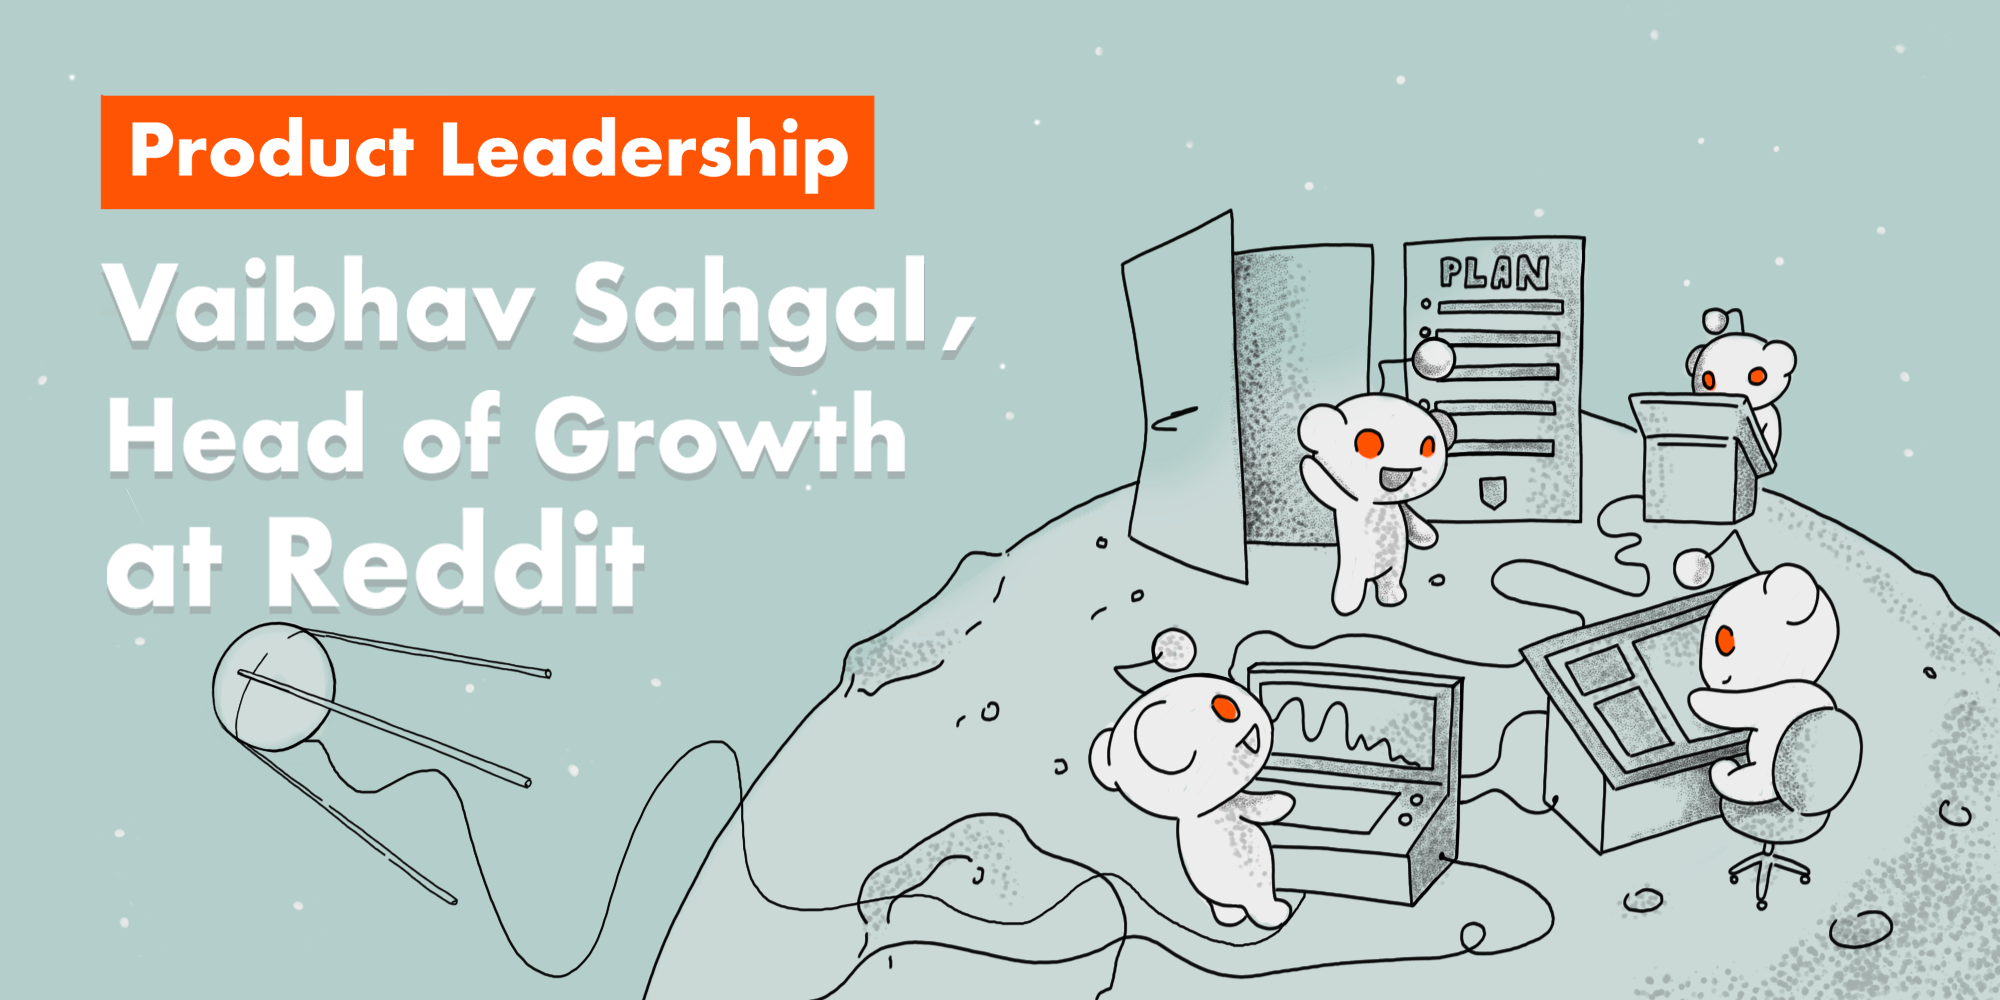 Product Leadership: interview with Vaibhav Sahgal, Head of Growth at Reddit